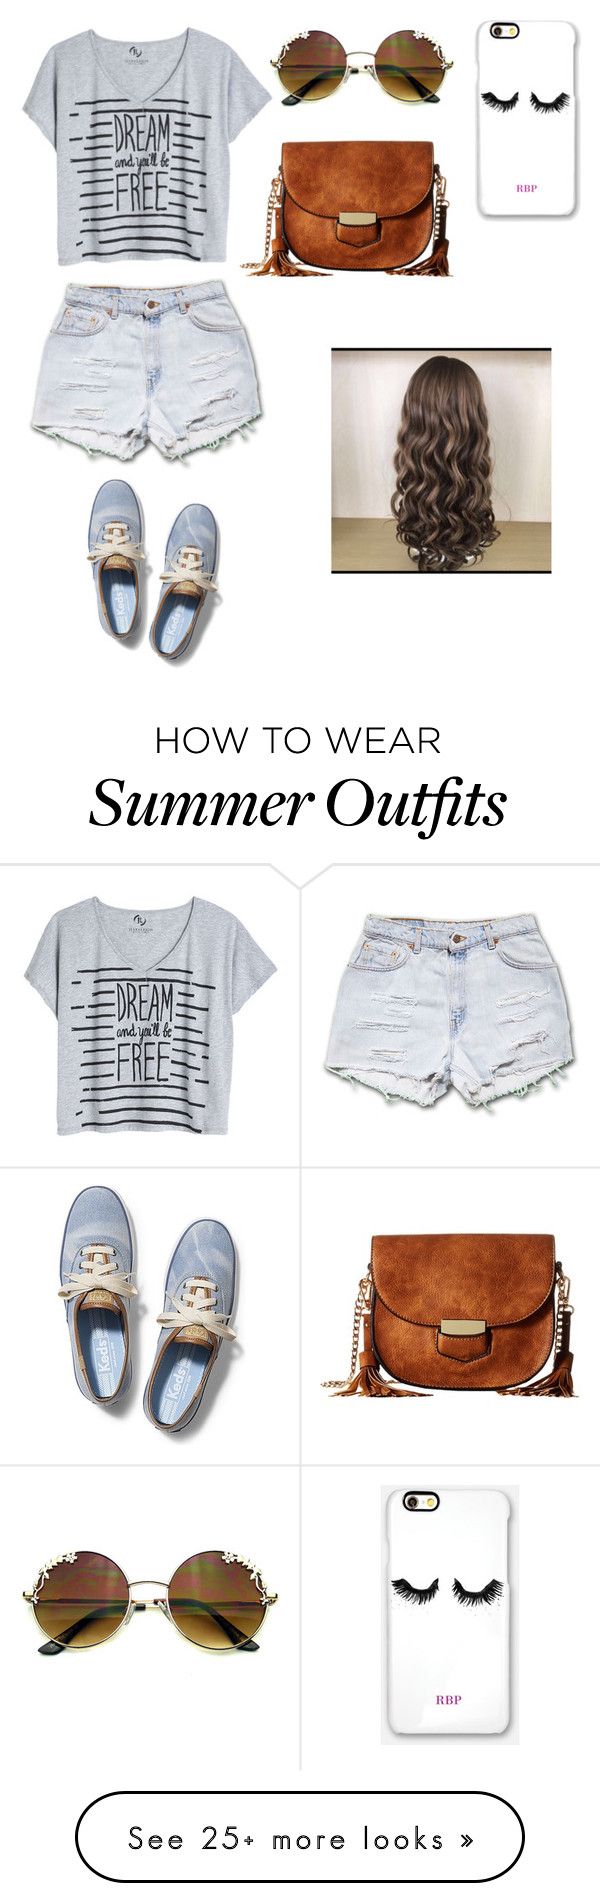 "Summer outfit, for chilling and hanging out with friends." by fashion...